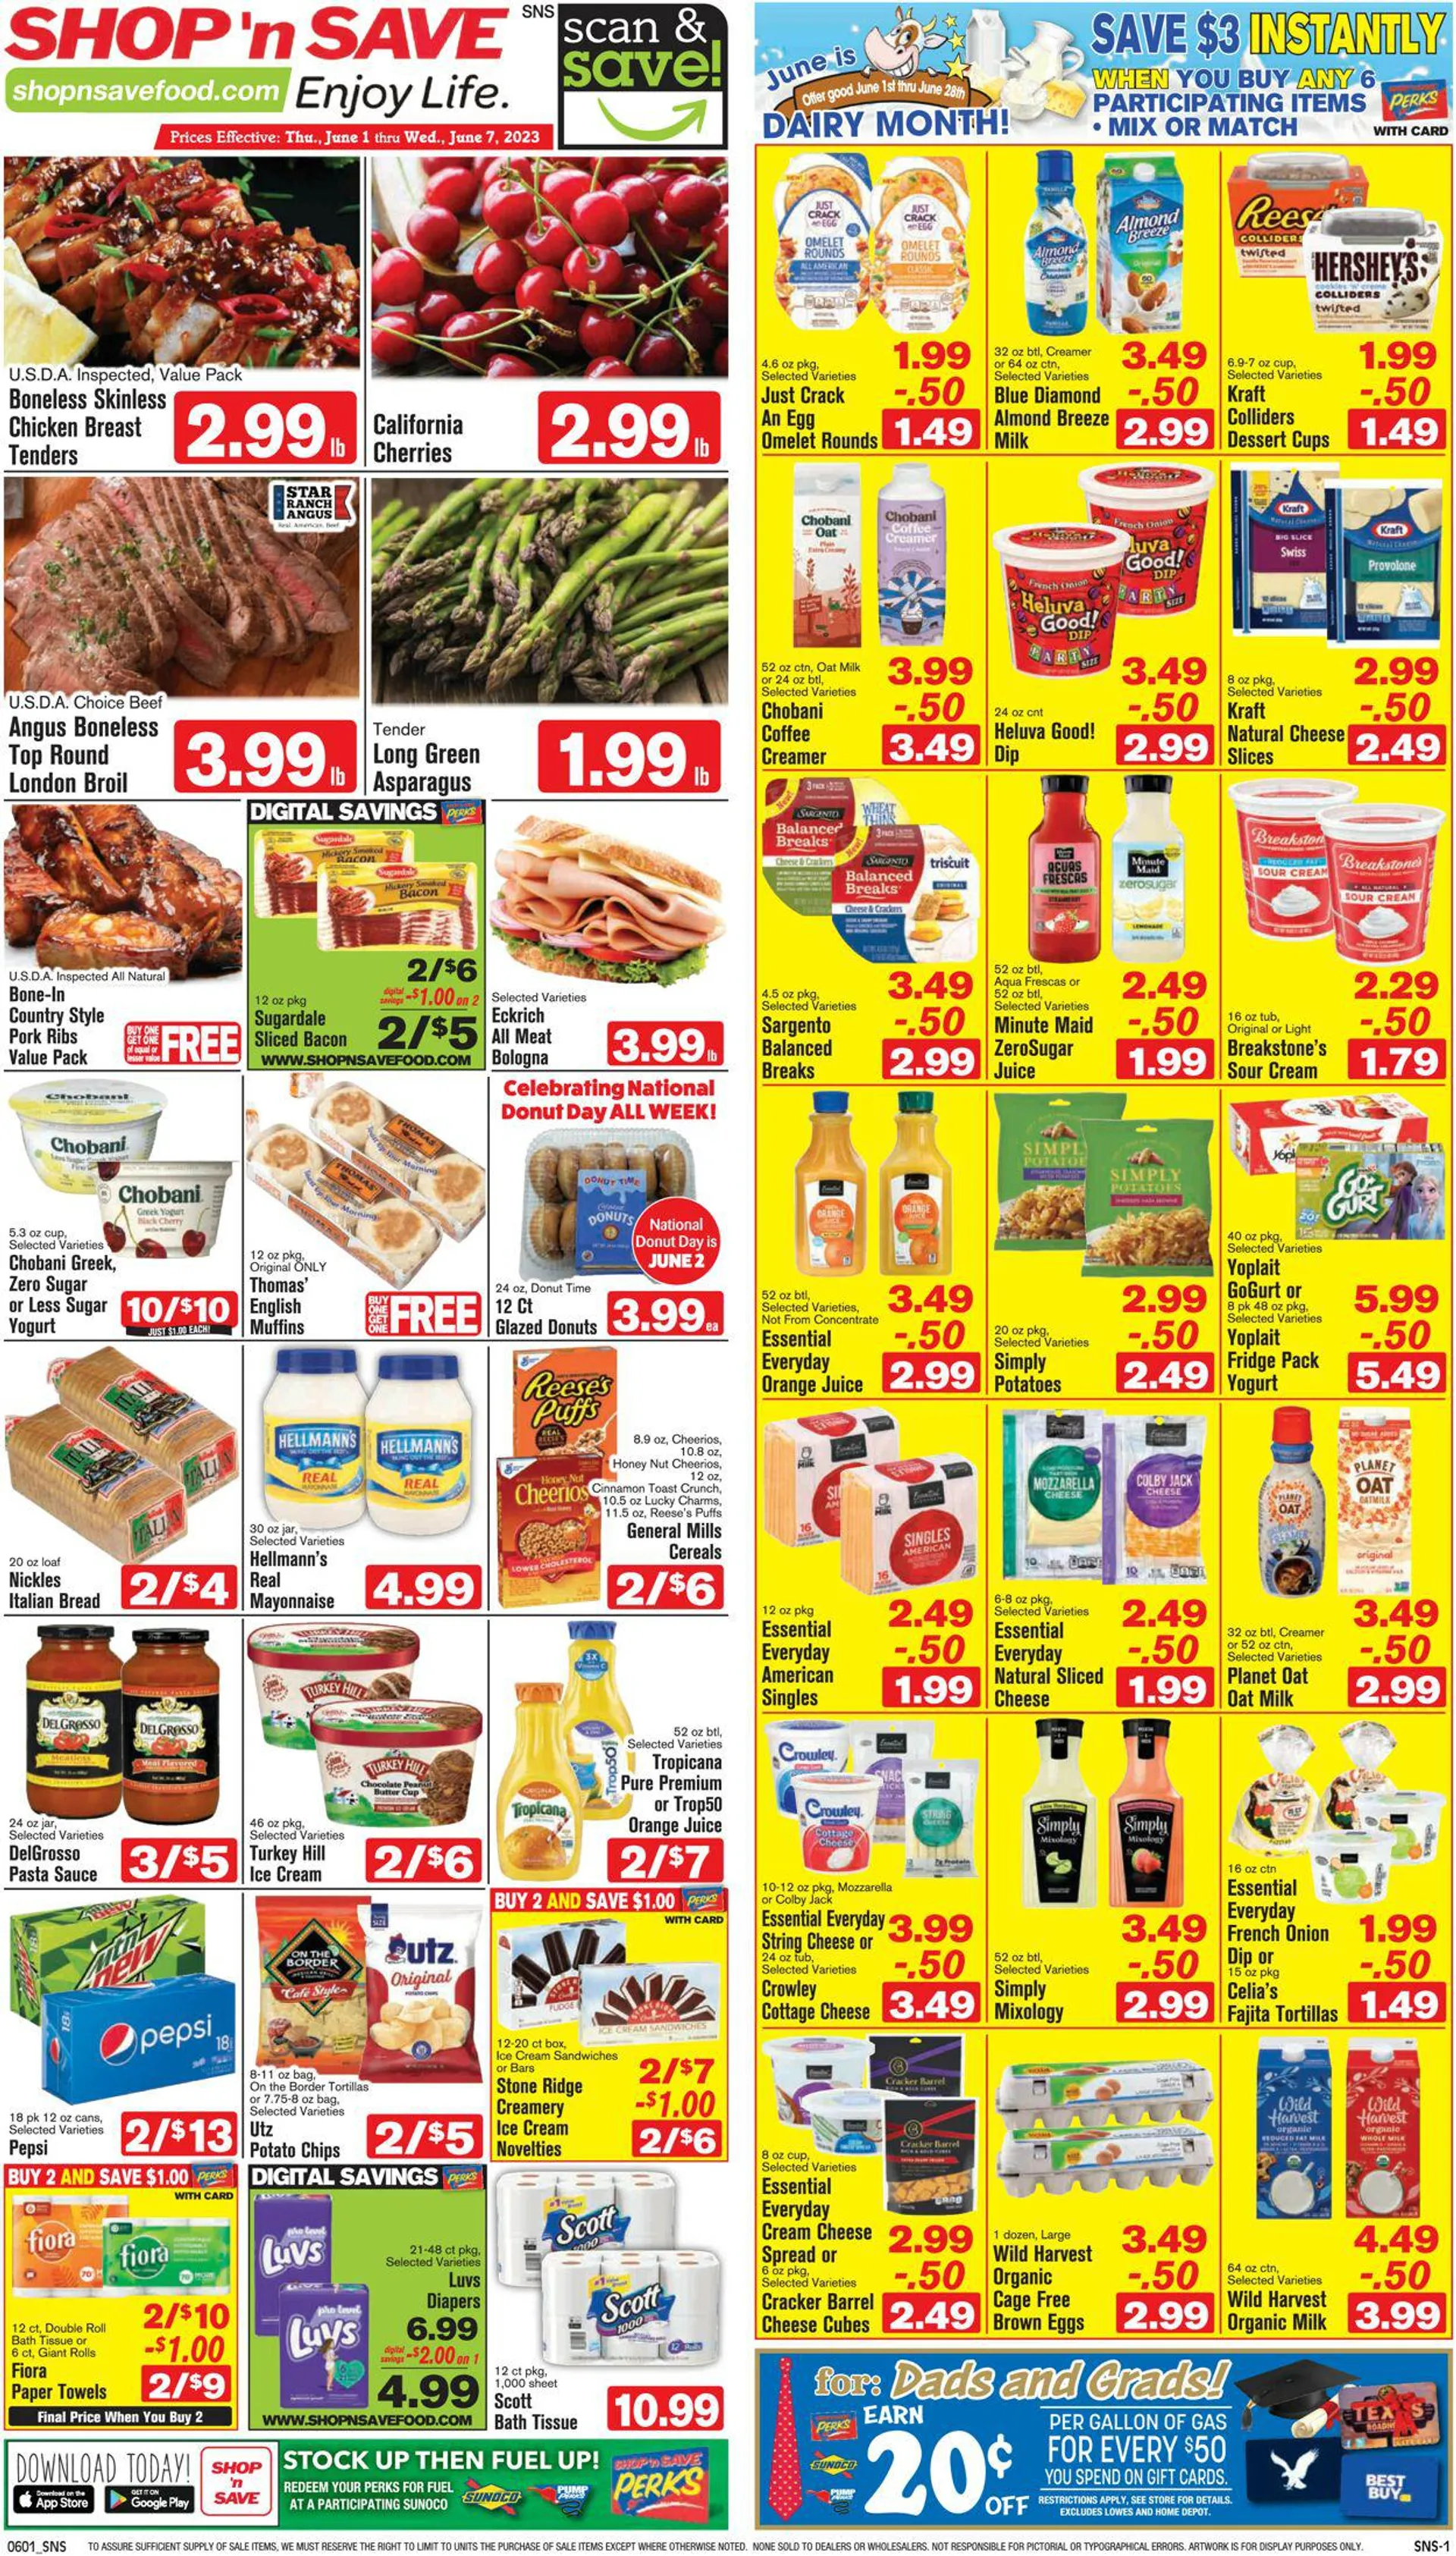 Shop ‘n Save Current weekly ad - 1